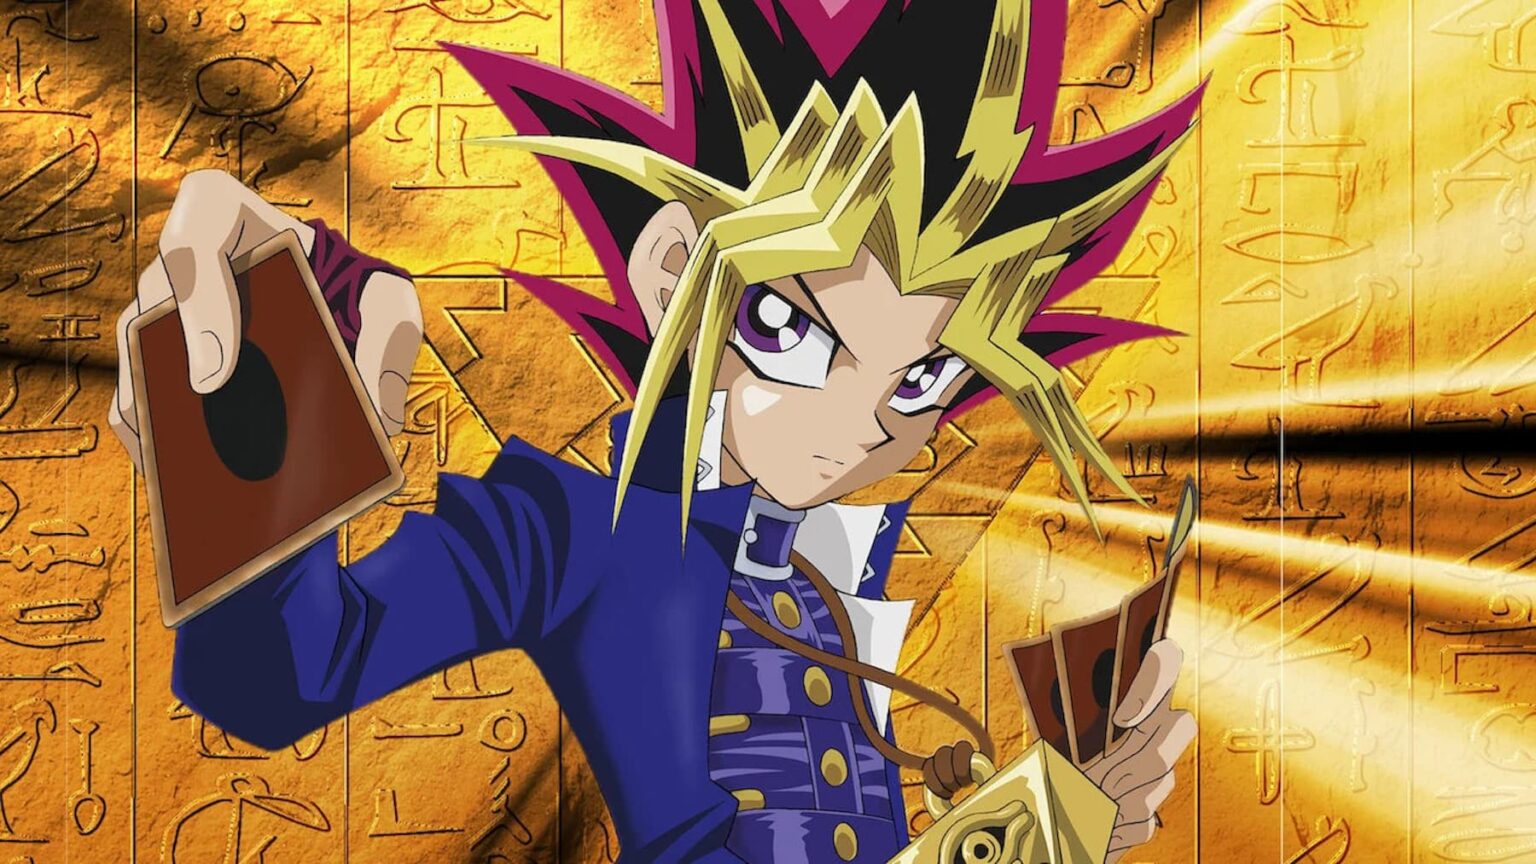 'Yu-Gi-Oh!' creator Kazuki Takahashi has been found dead under mysterious circumstances. Discover his legacy and worldwide success with card games.